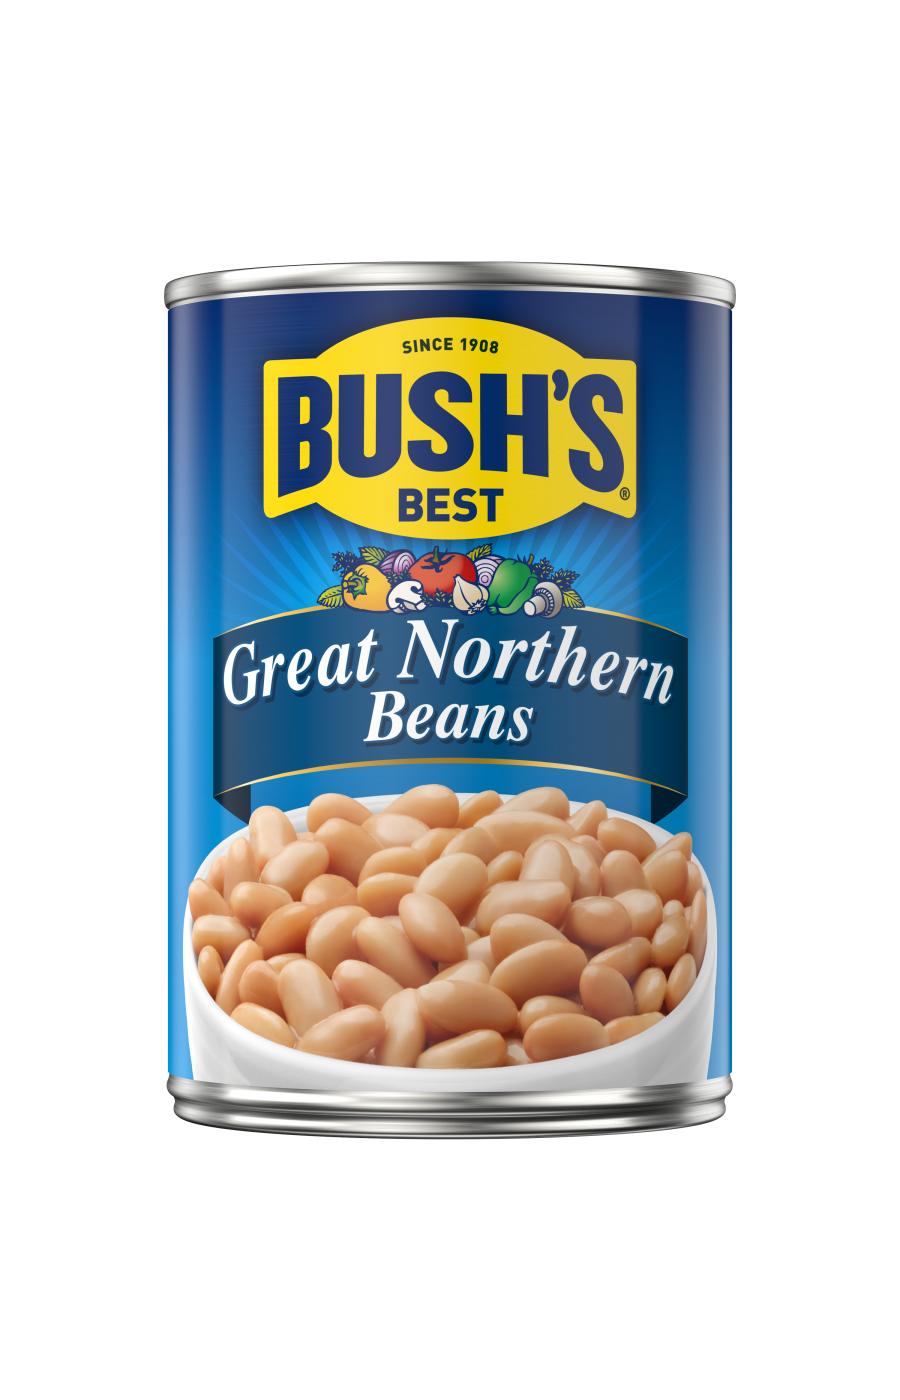 Bush's Best Great Northern Beans; image 1 of 4